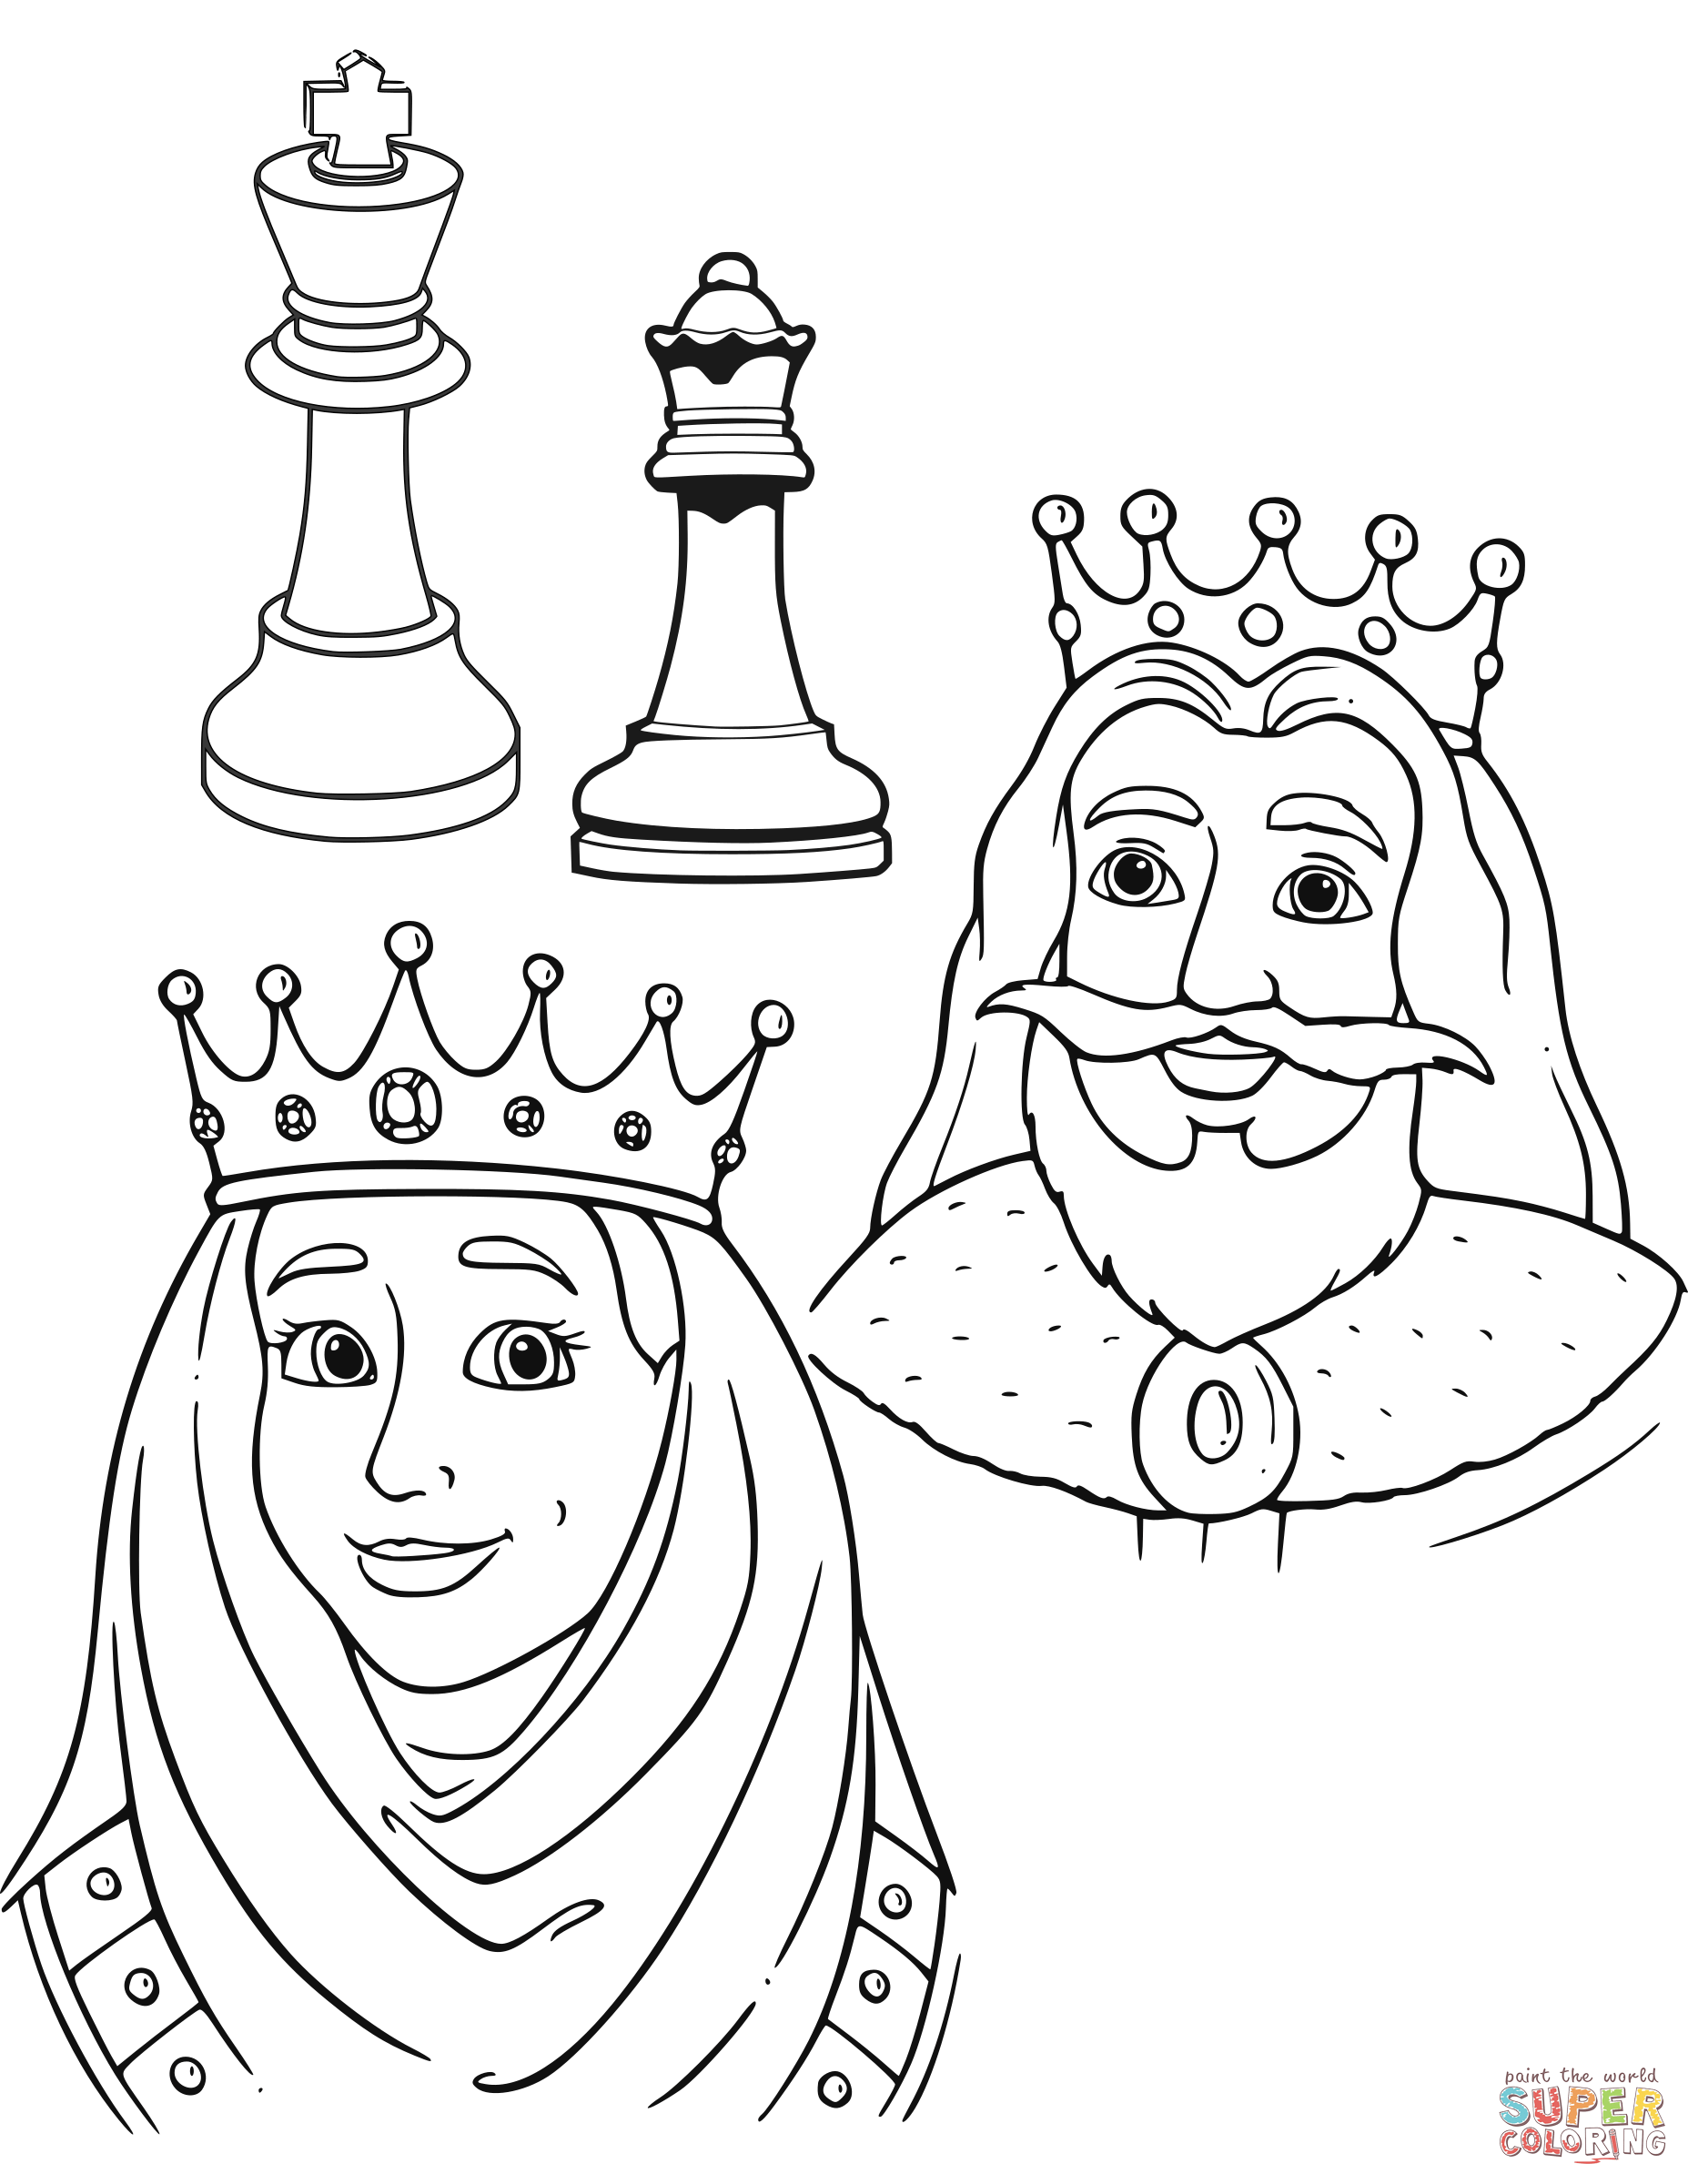 Queen And King Chess Pieces Coloring Page   Free Printable ...